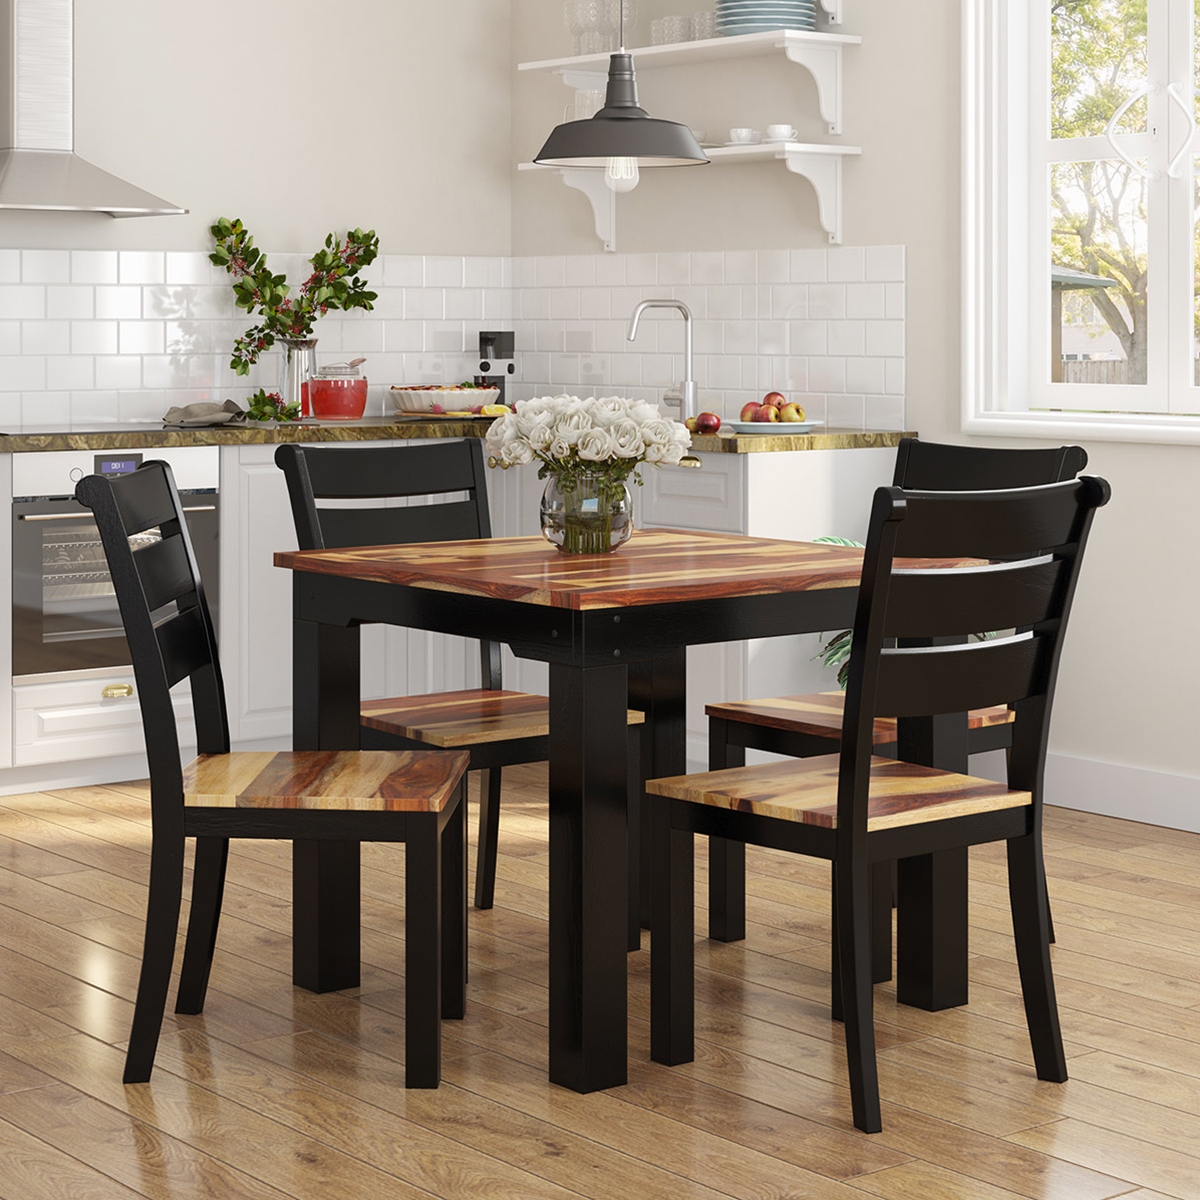 https://www.sierralivingconcepts.com/images/thumbs/0390783_mason-two-toned-small-square-kitchen-table-and-4-chairs-set.jpeg